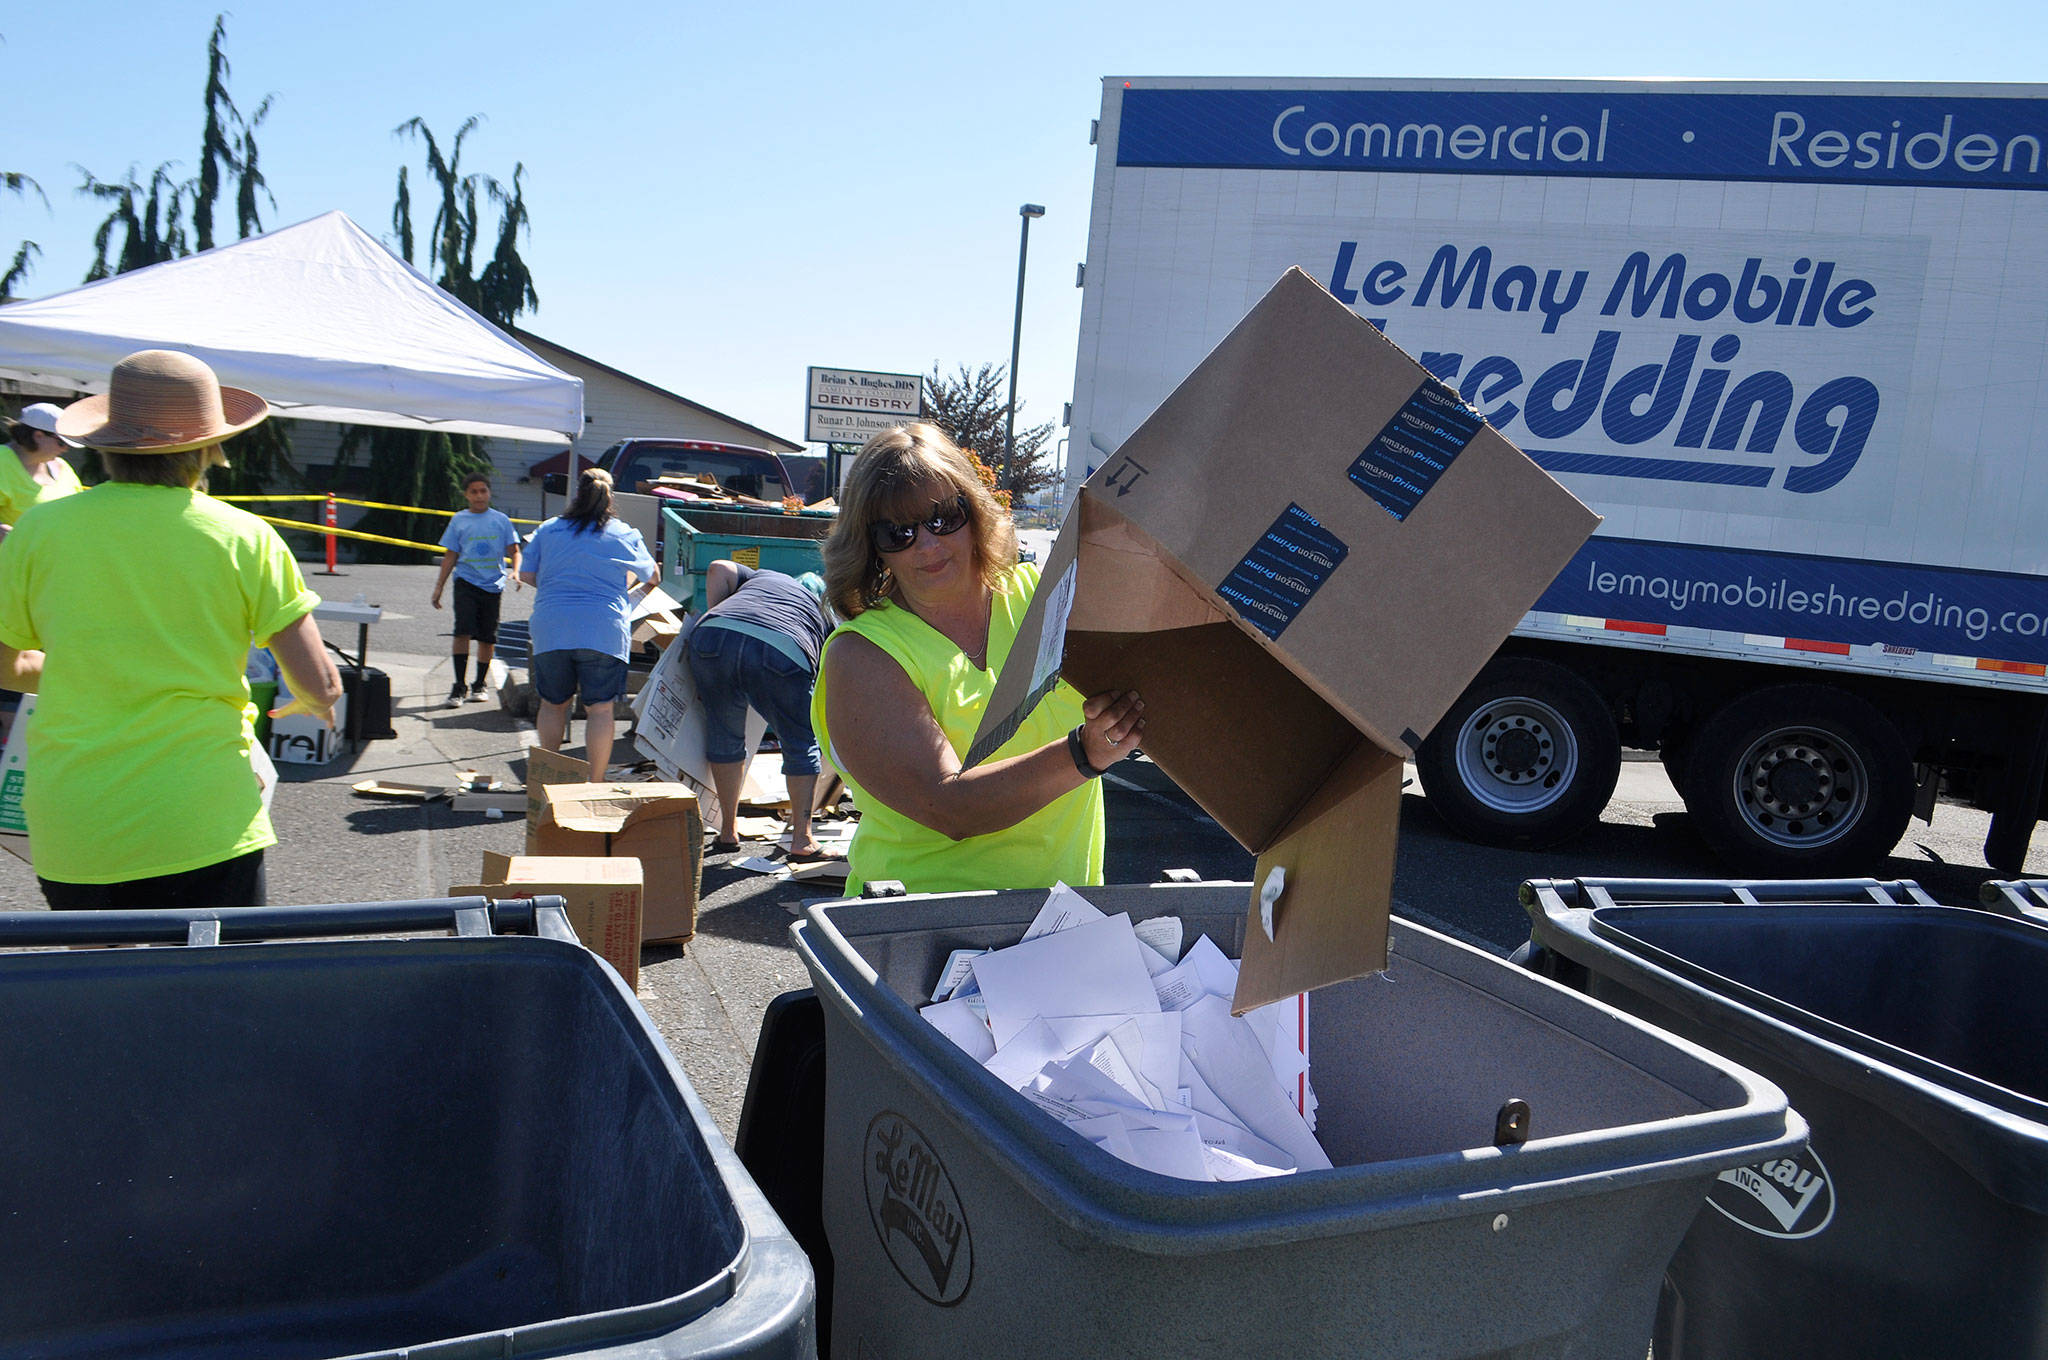 Castell’s seventh shred event set for Aug. 24